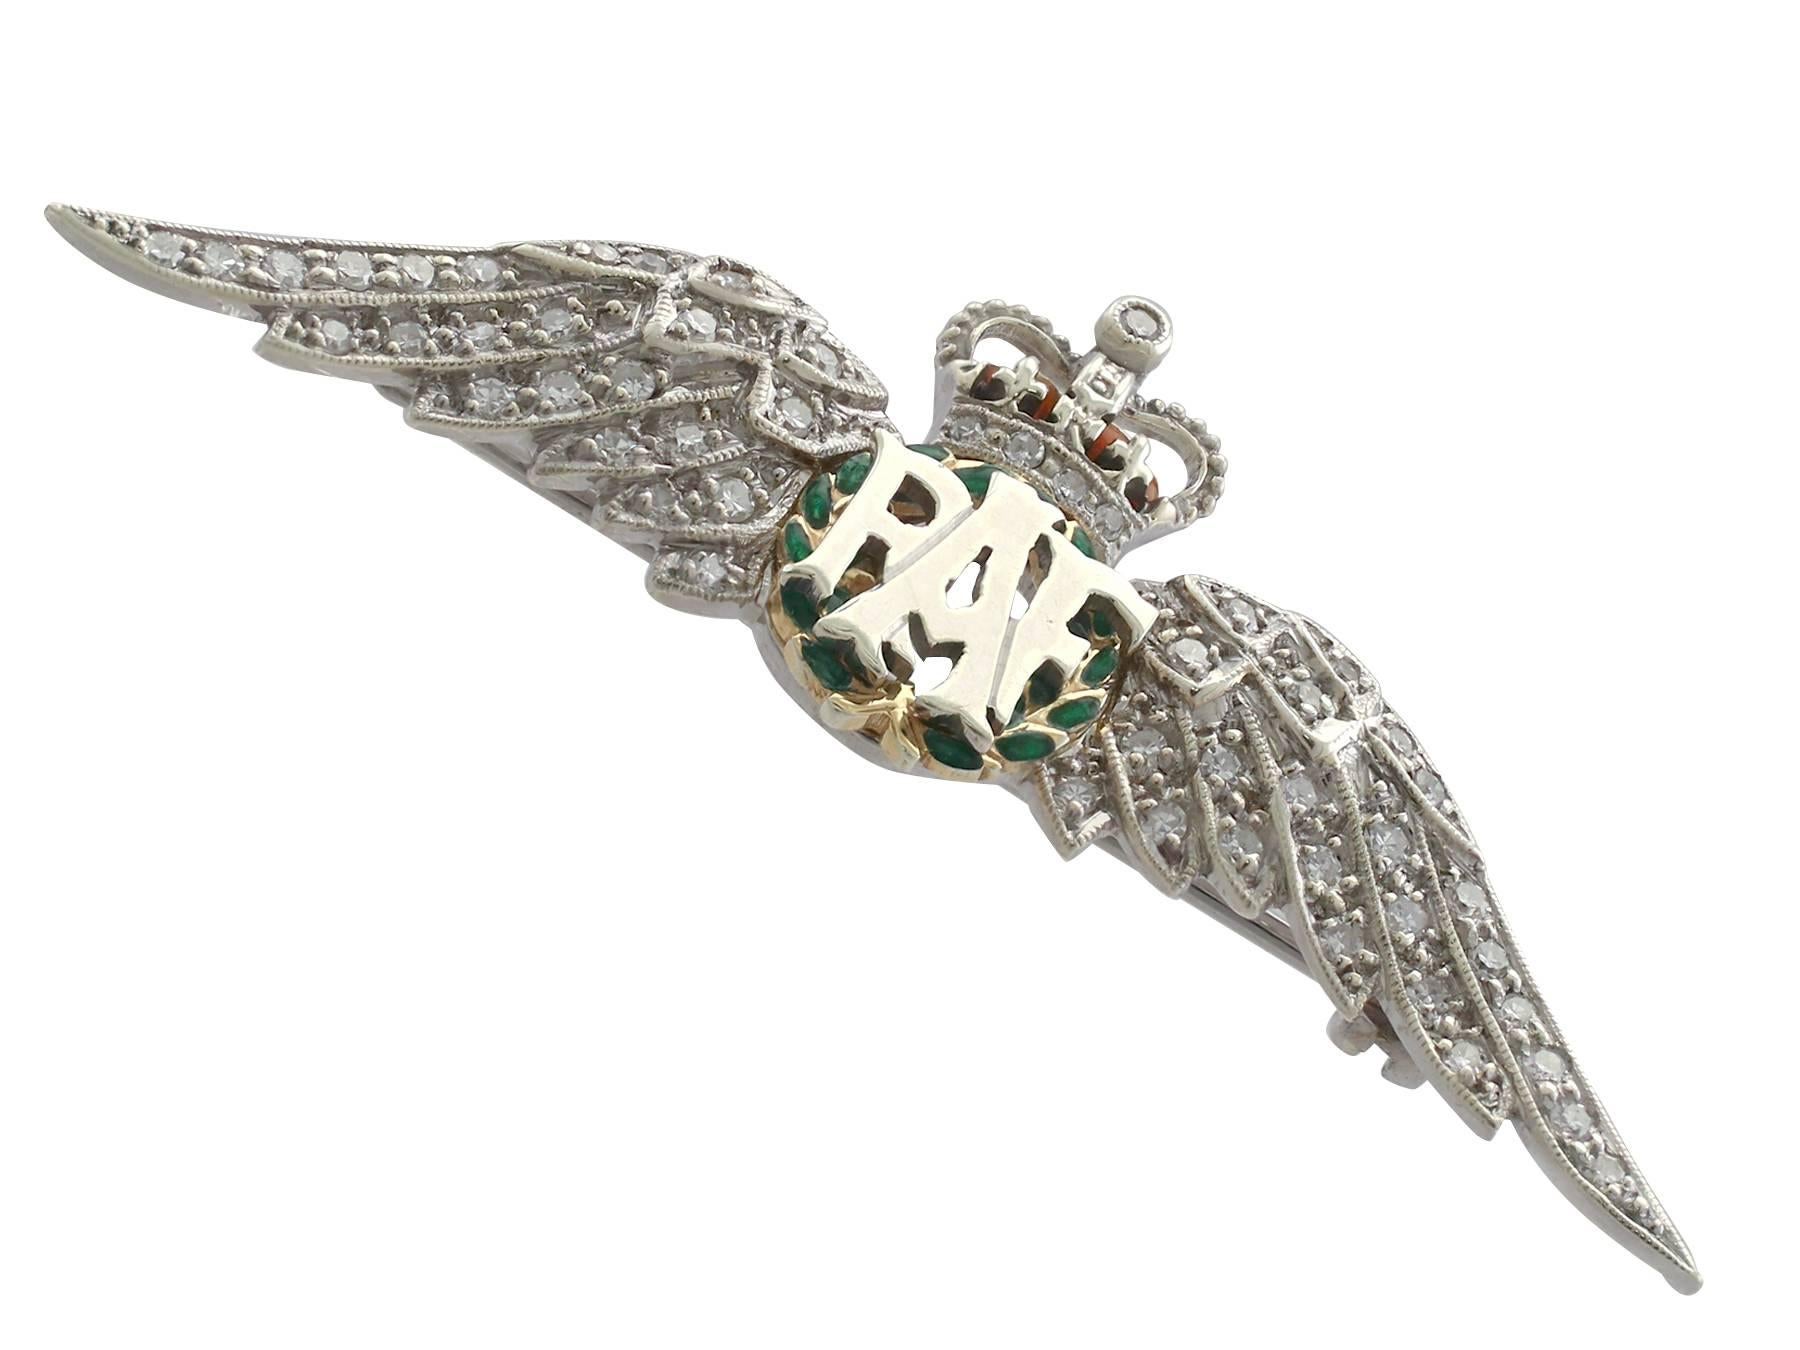 An impressive vintage 0.68 carat diamond and enamel, 9 carat white and 9 carat yellow gold 'RAF' brooch; part of our diverse vintage jewellery collections

This fine and impressive diamond brooch has been crafted in 9 ct yellow and white gold.

The